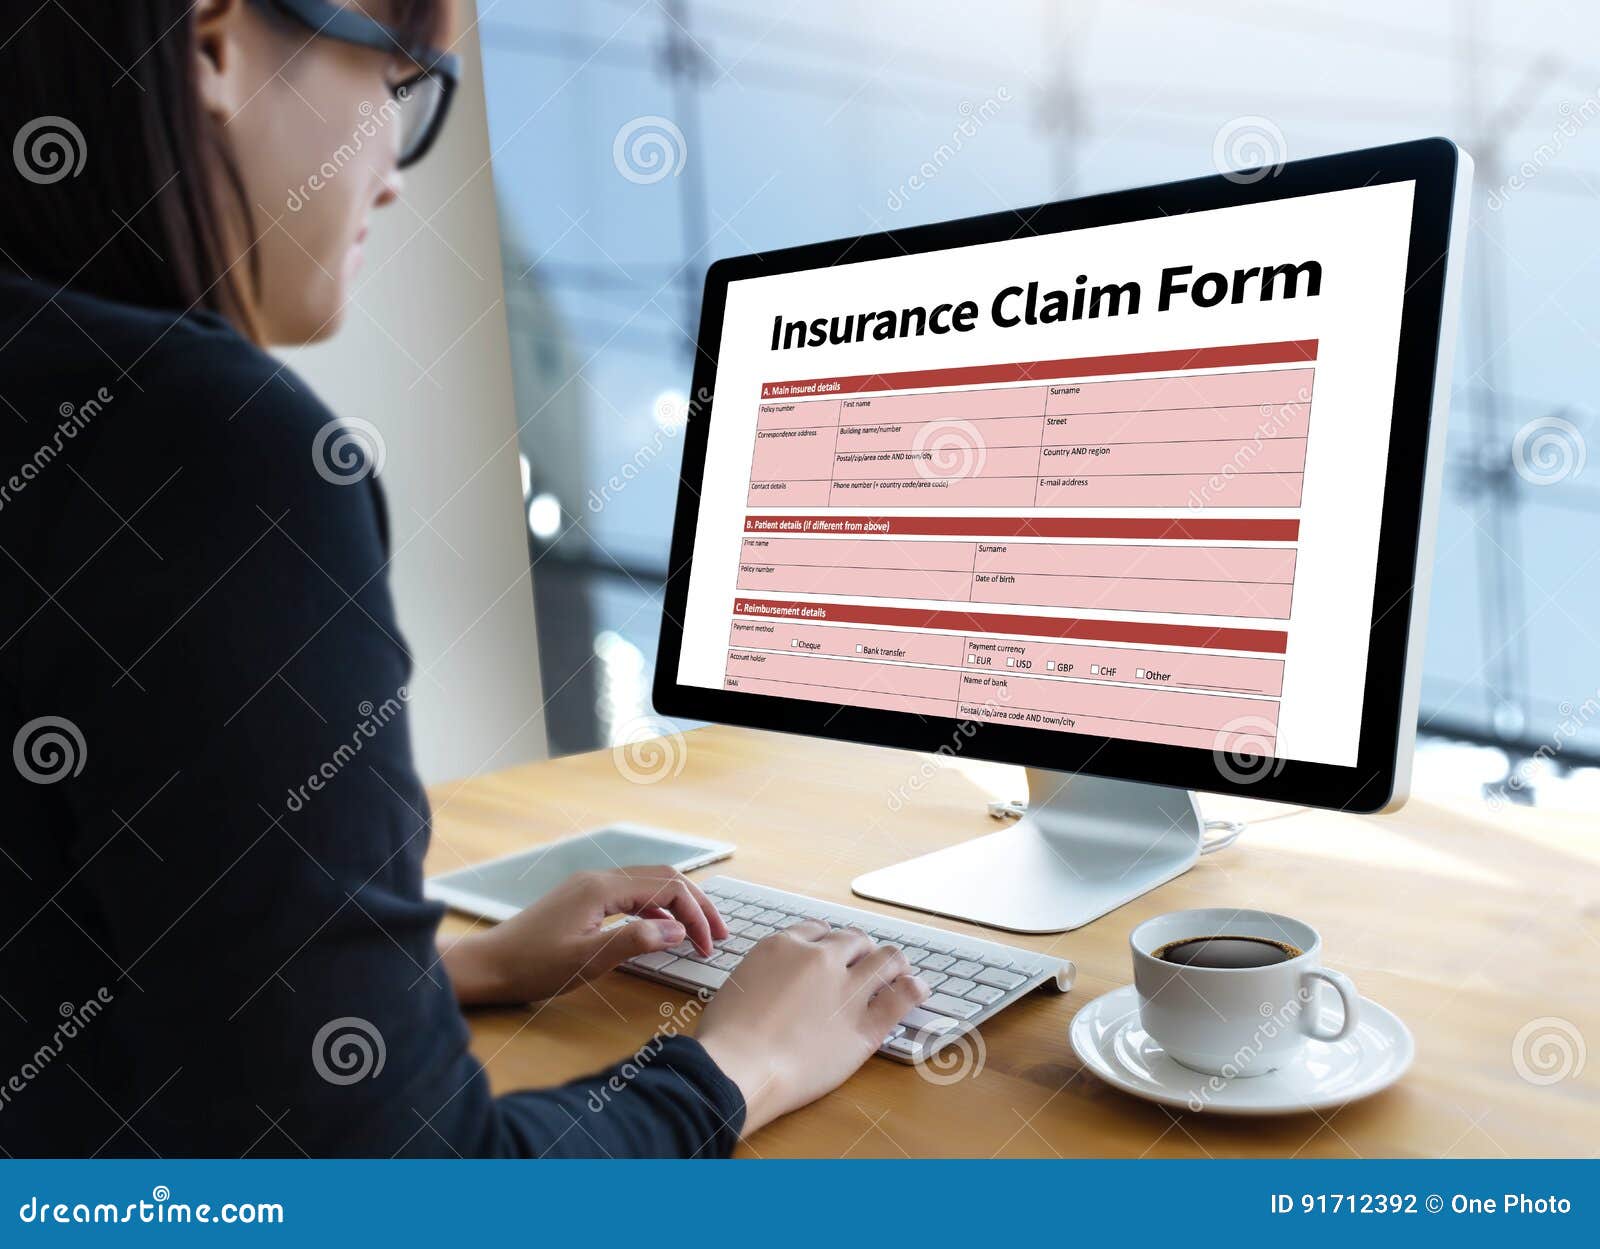 claims health insurance form , business concept , insured claims